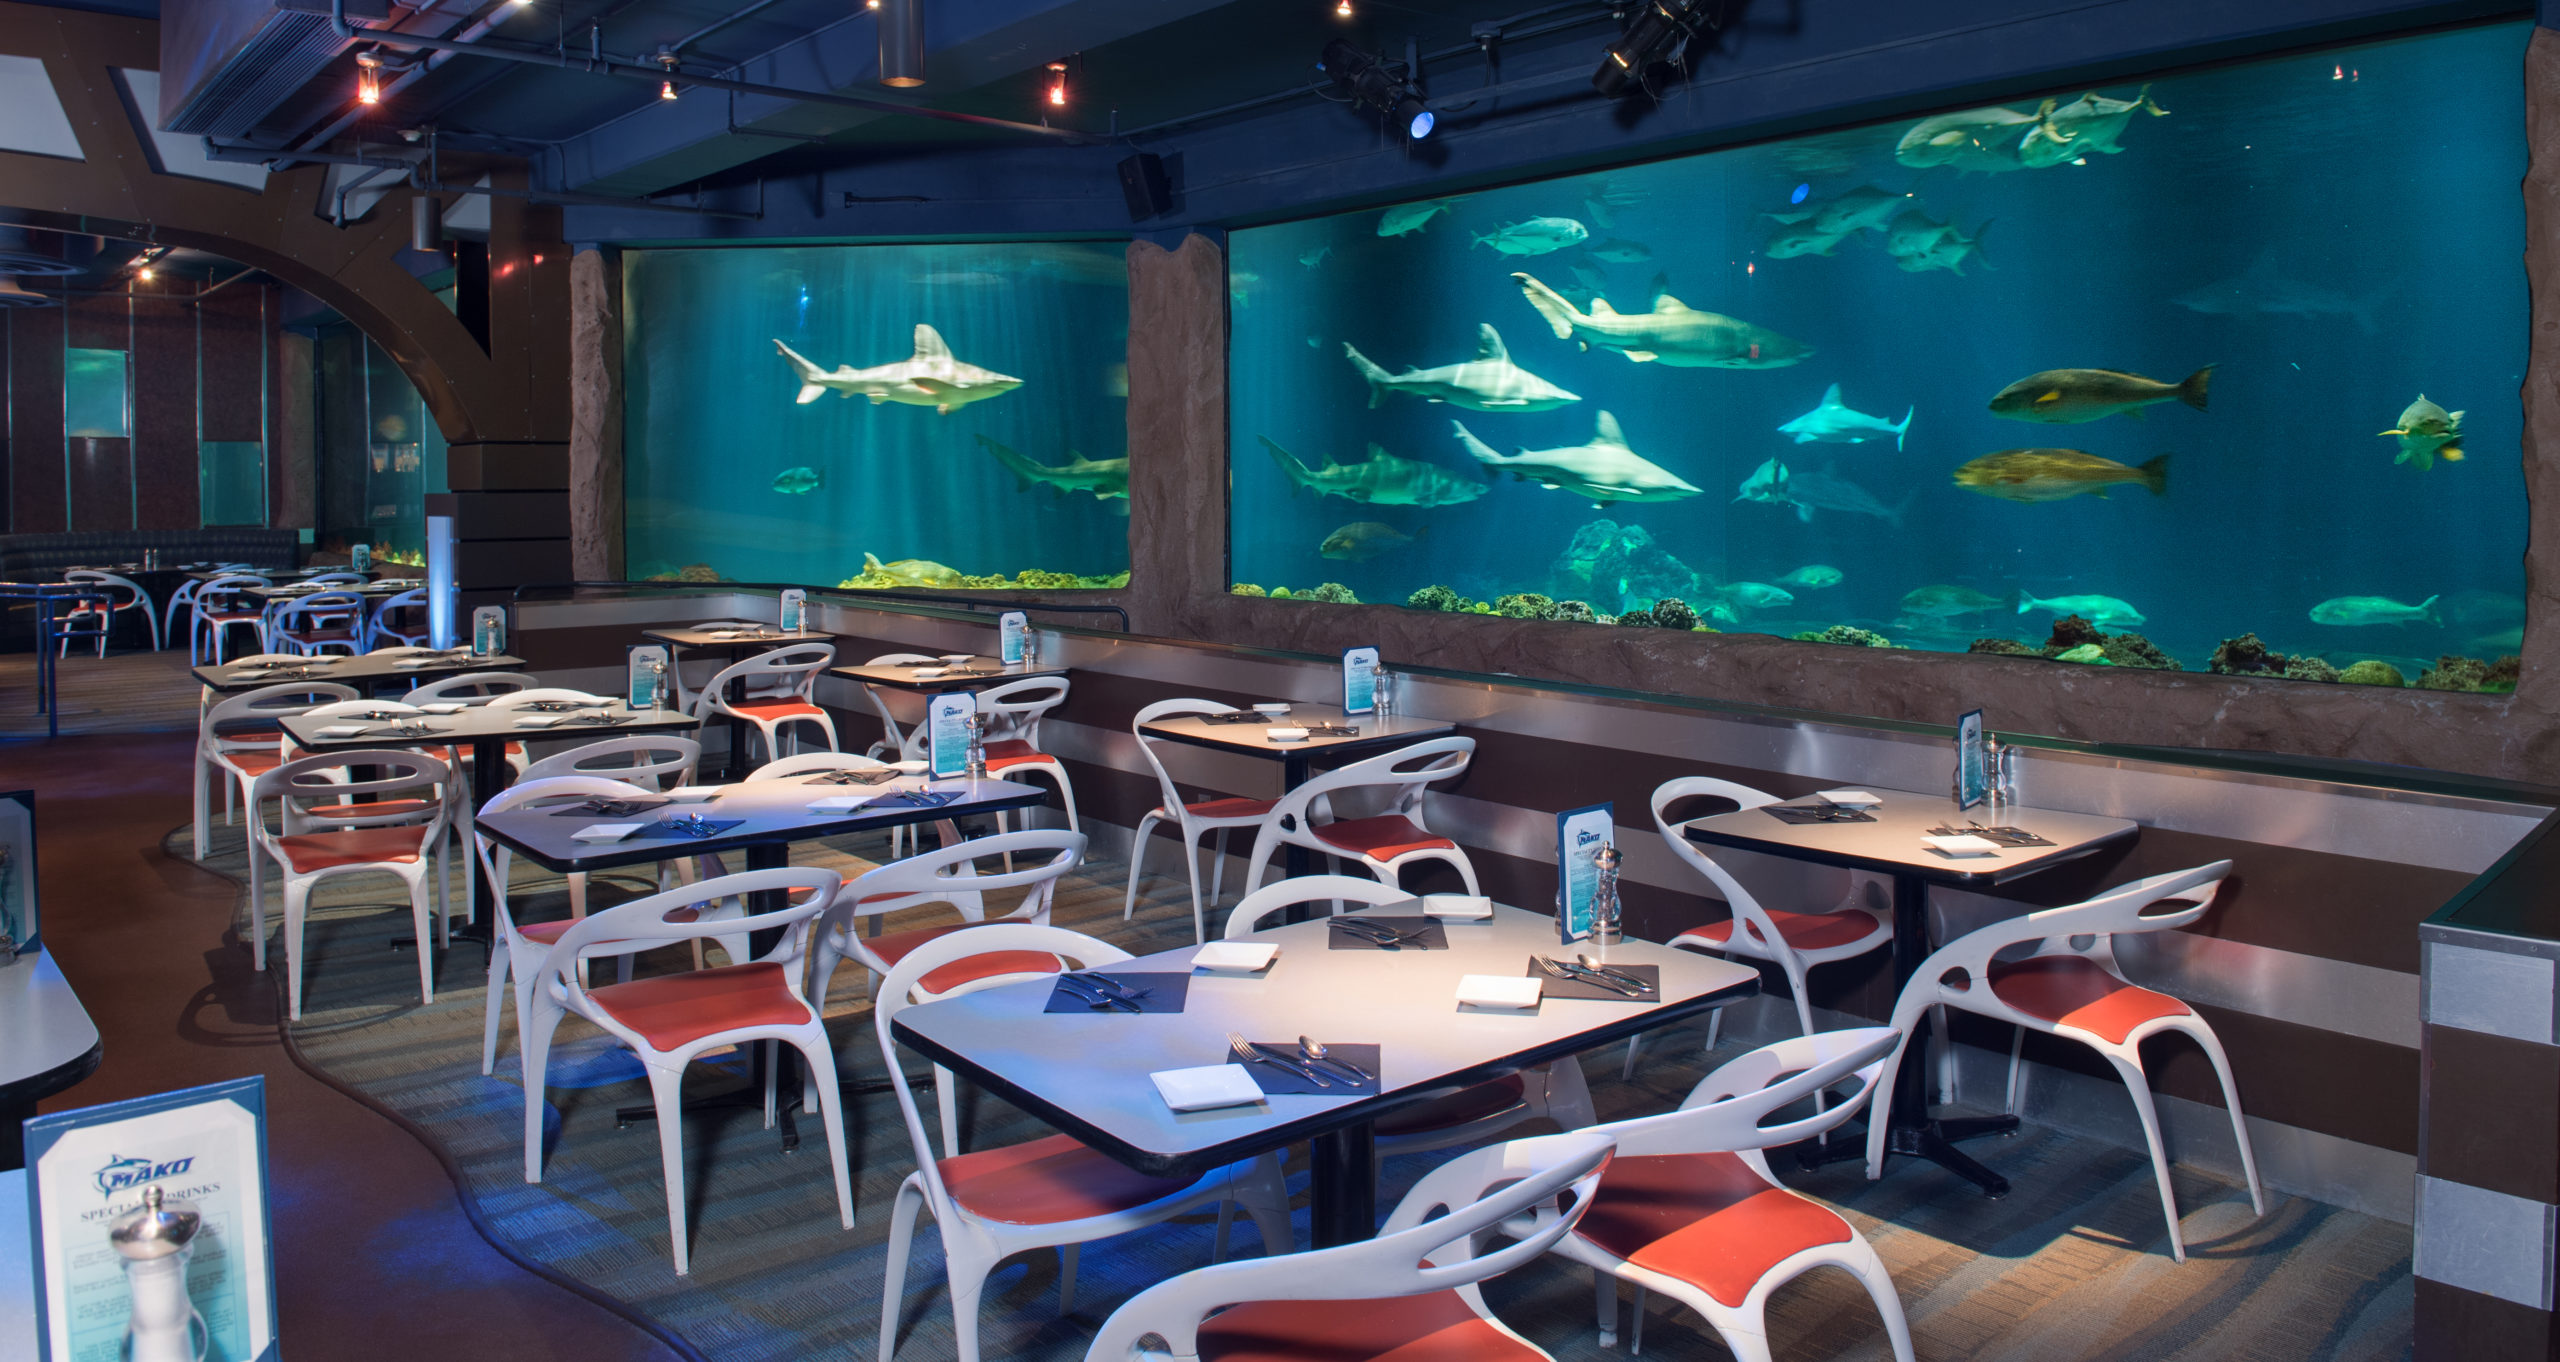 Orlando Magical Dining Month offers limited time special at Sharks Underwater Grill at SeaWorld | Acupful.com travel blog | Orlando family dining